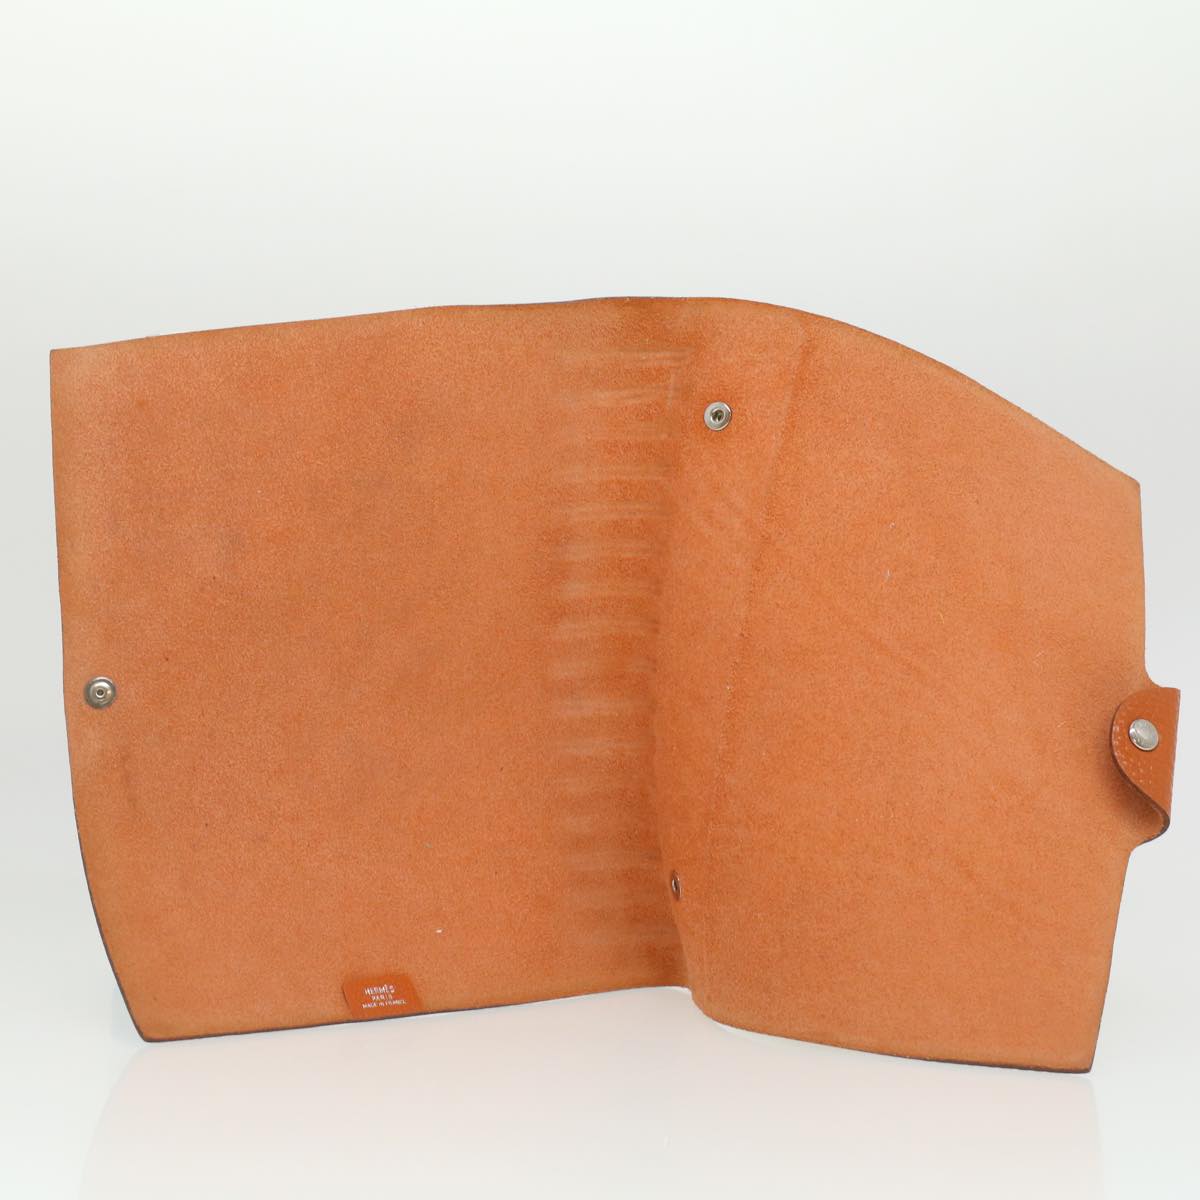 HERMES Yuris MM Note Cover Leather Orange Auth th3439